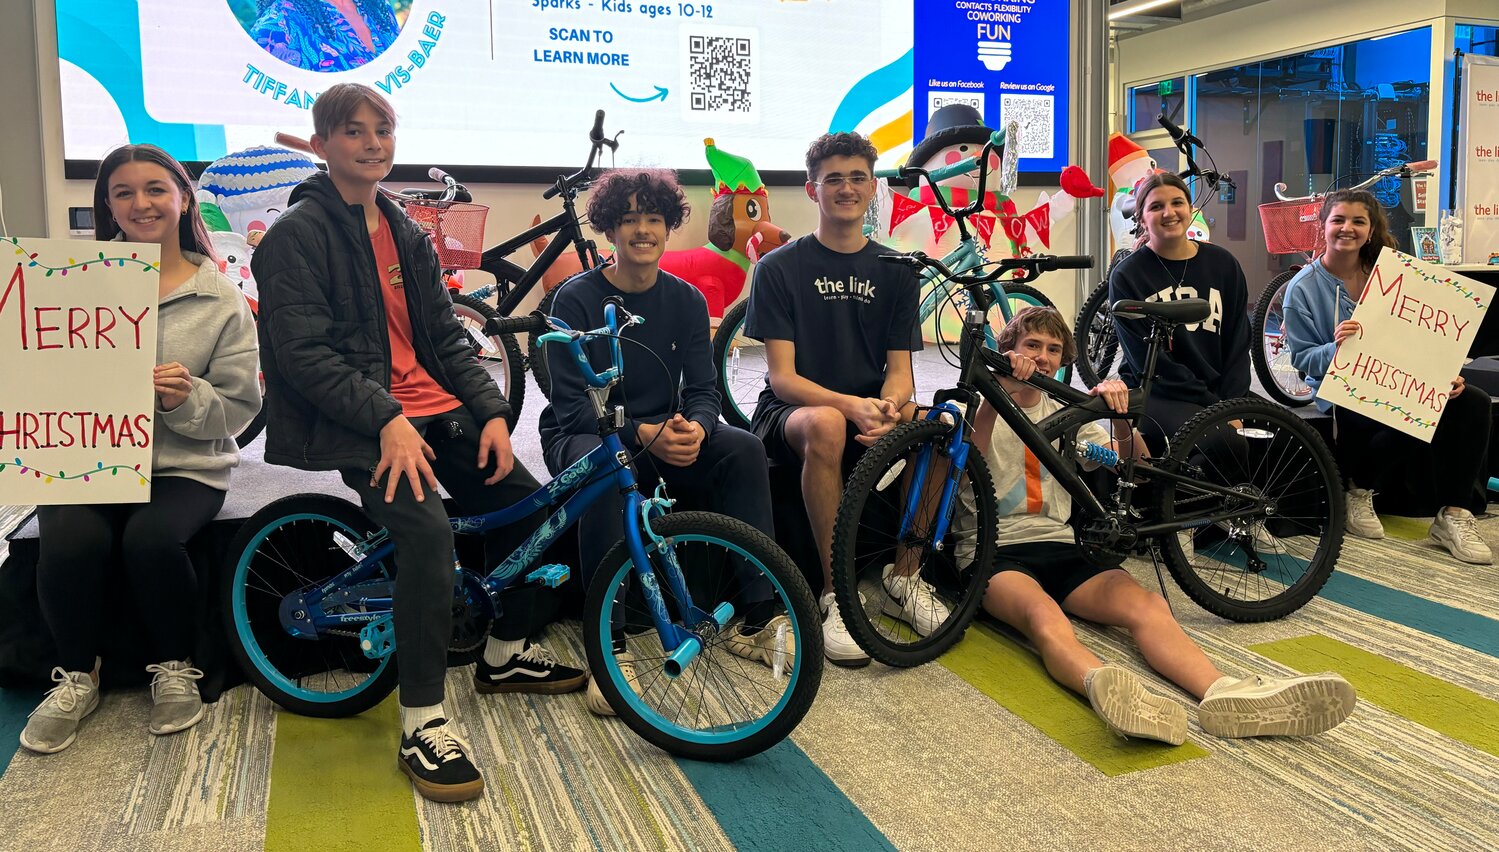 Members of the link Teen Club recently gathered to build bikes for deserving kids.